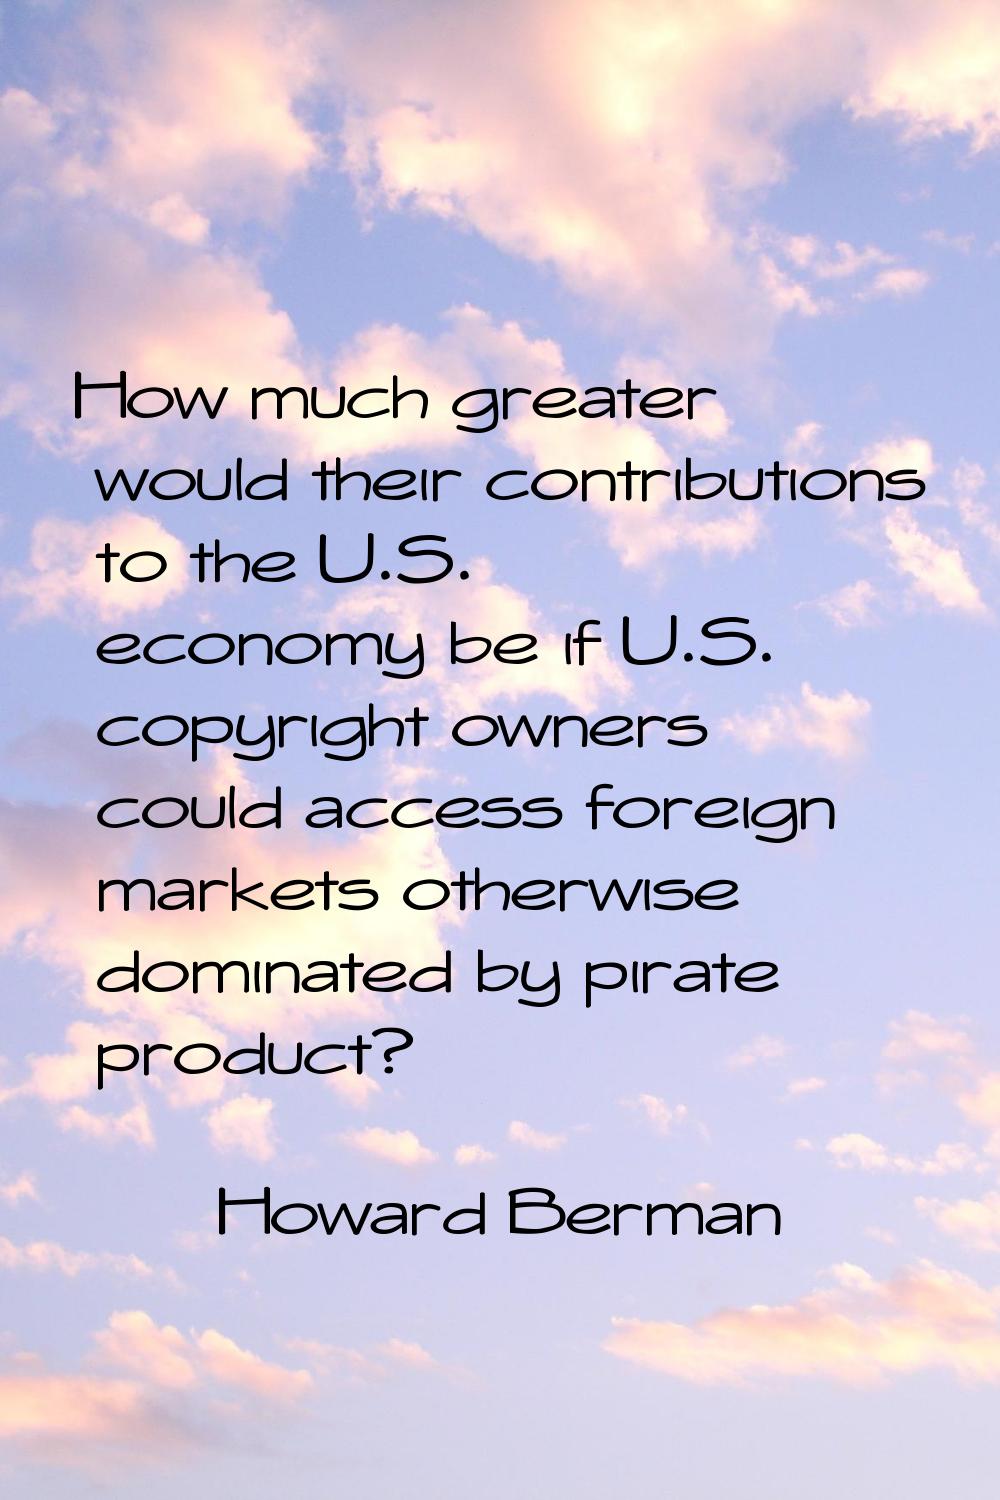 How much greater would their contributions to the U.S. economy be if U.S. copyright owners could ac